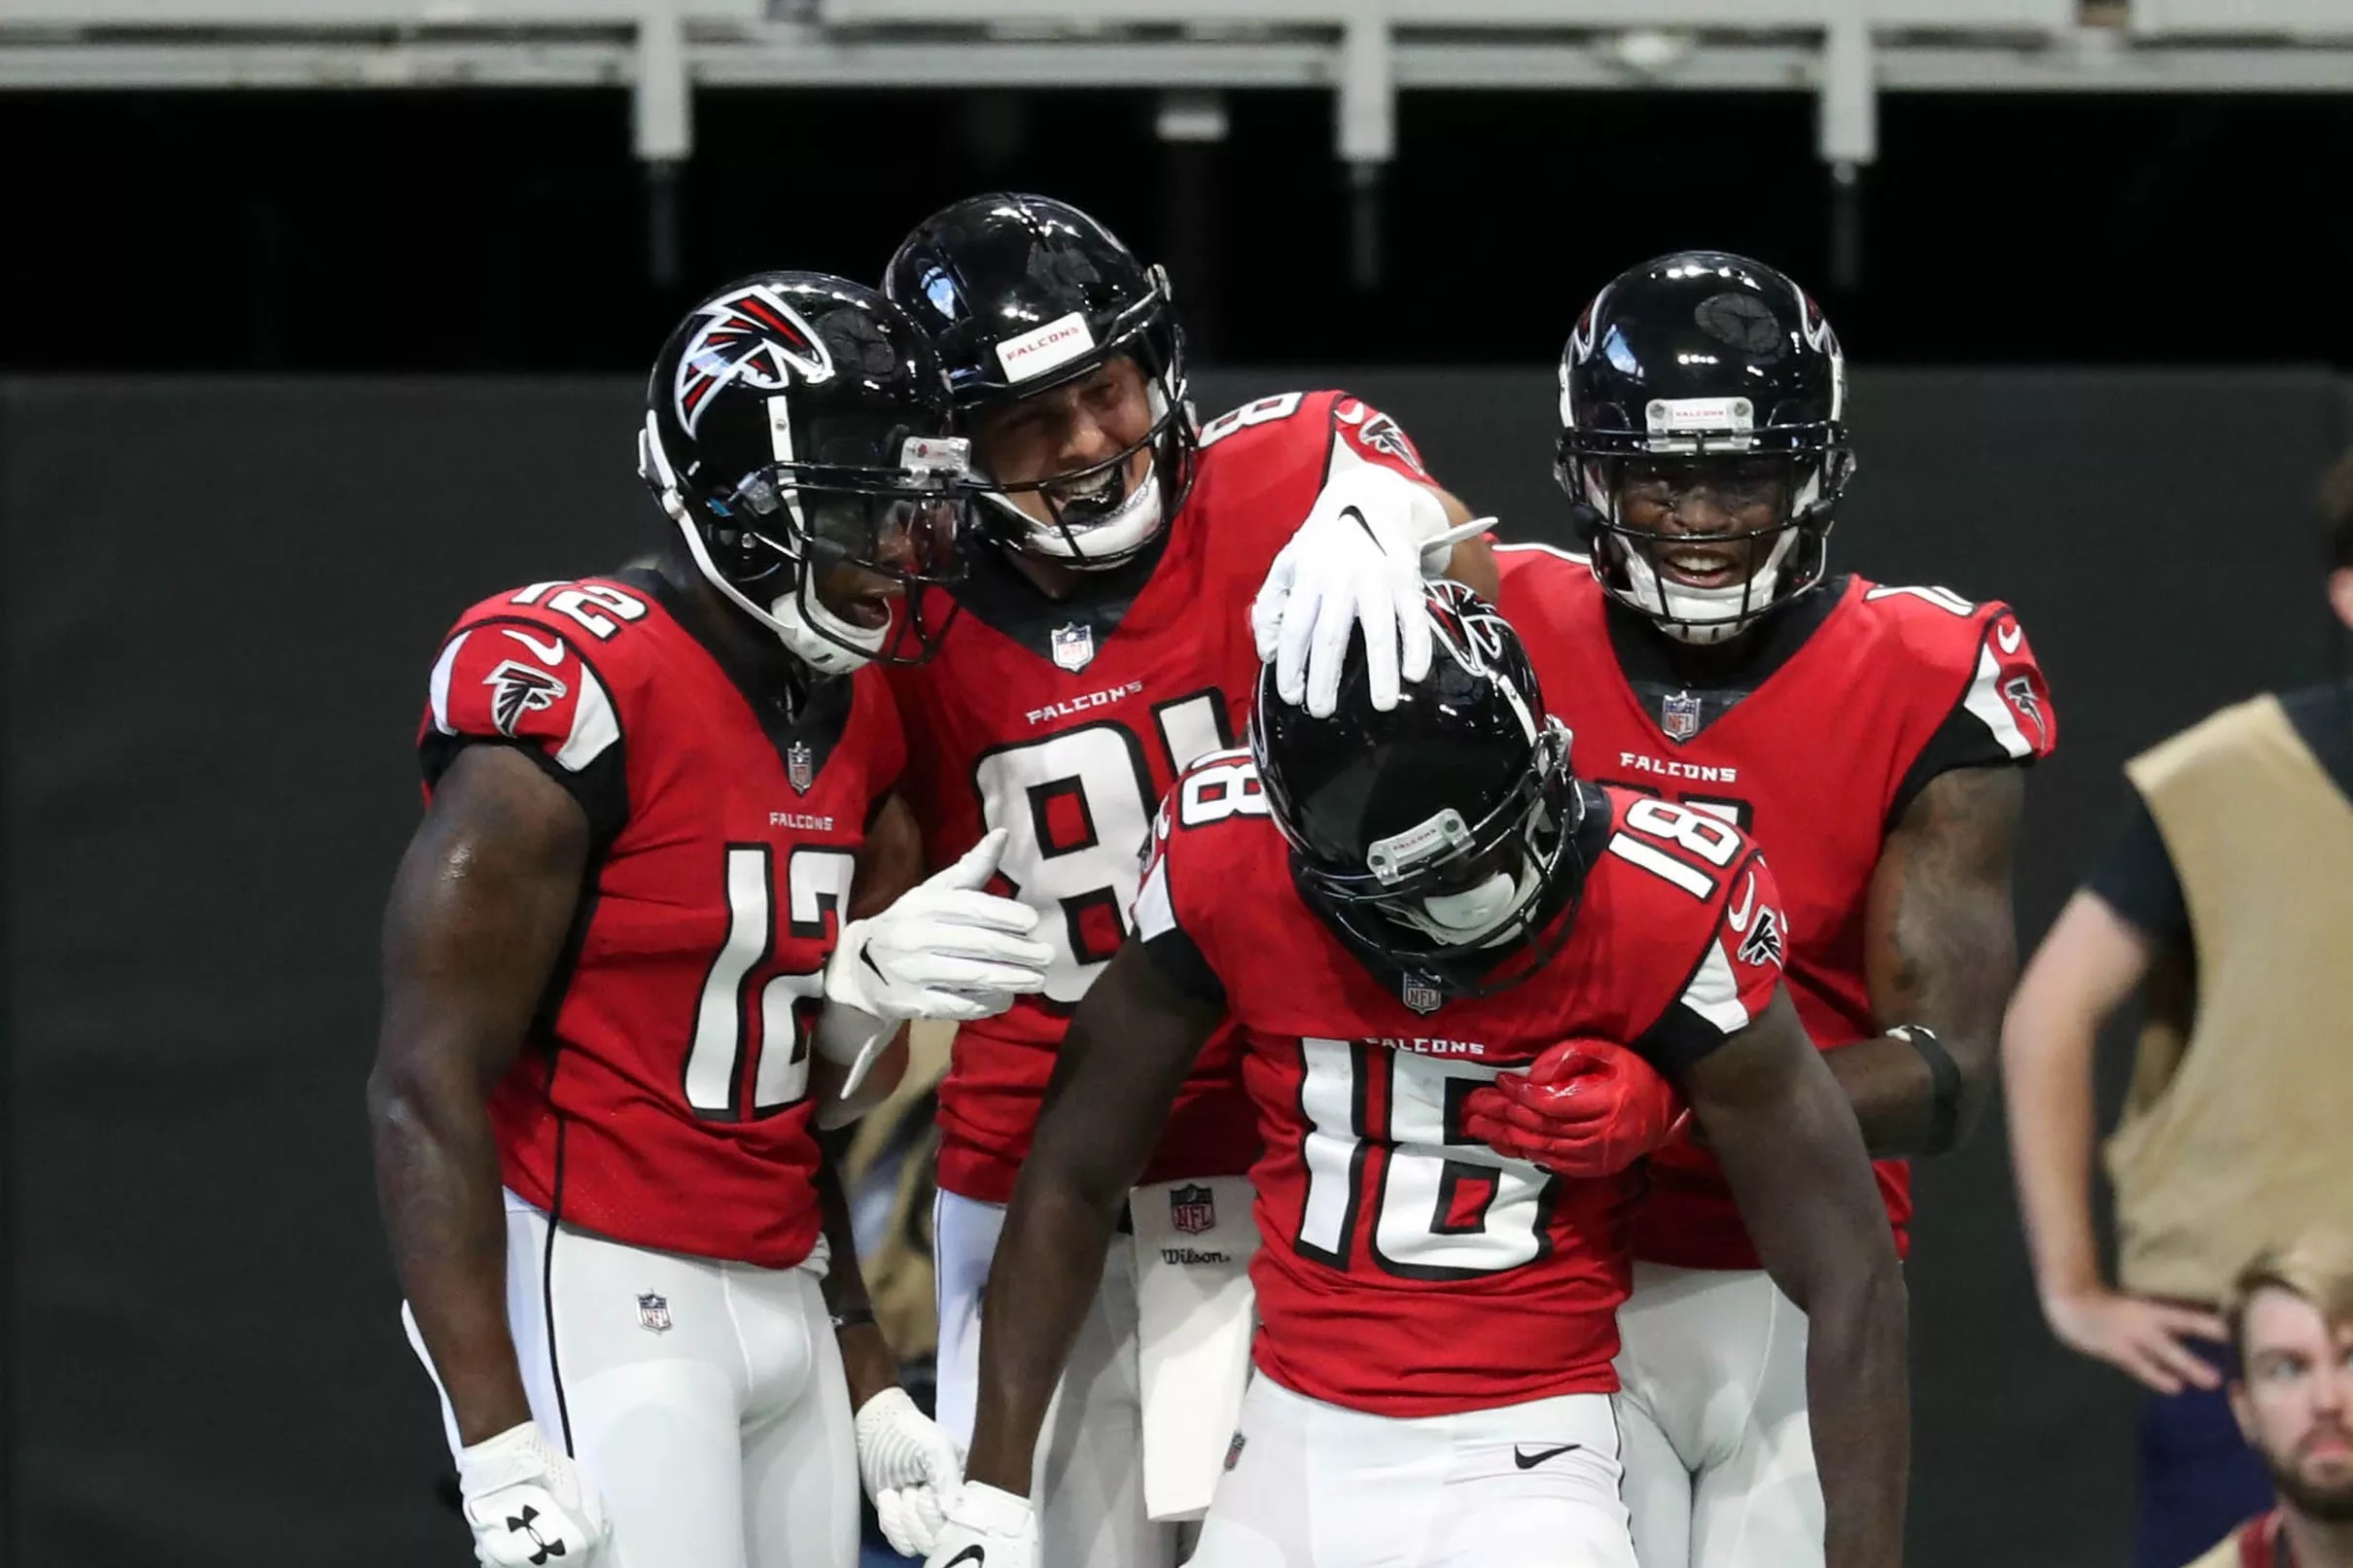 Do the Falcons have the NFL’s best WR corps?